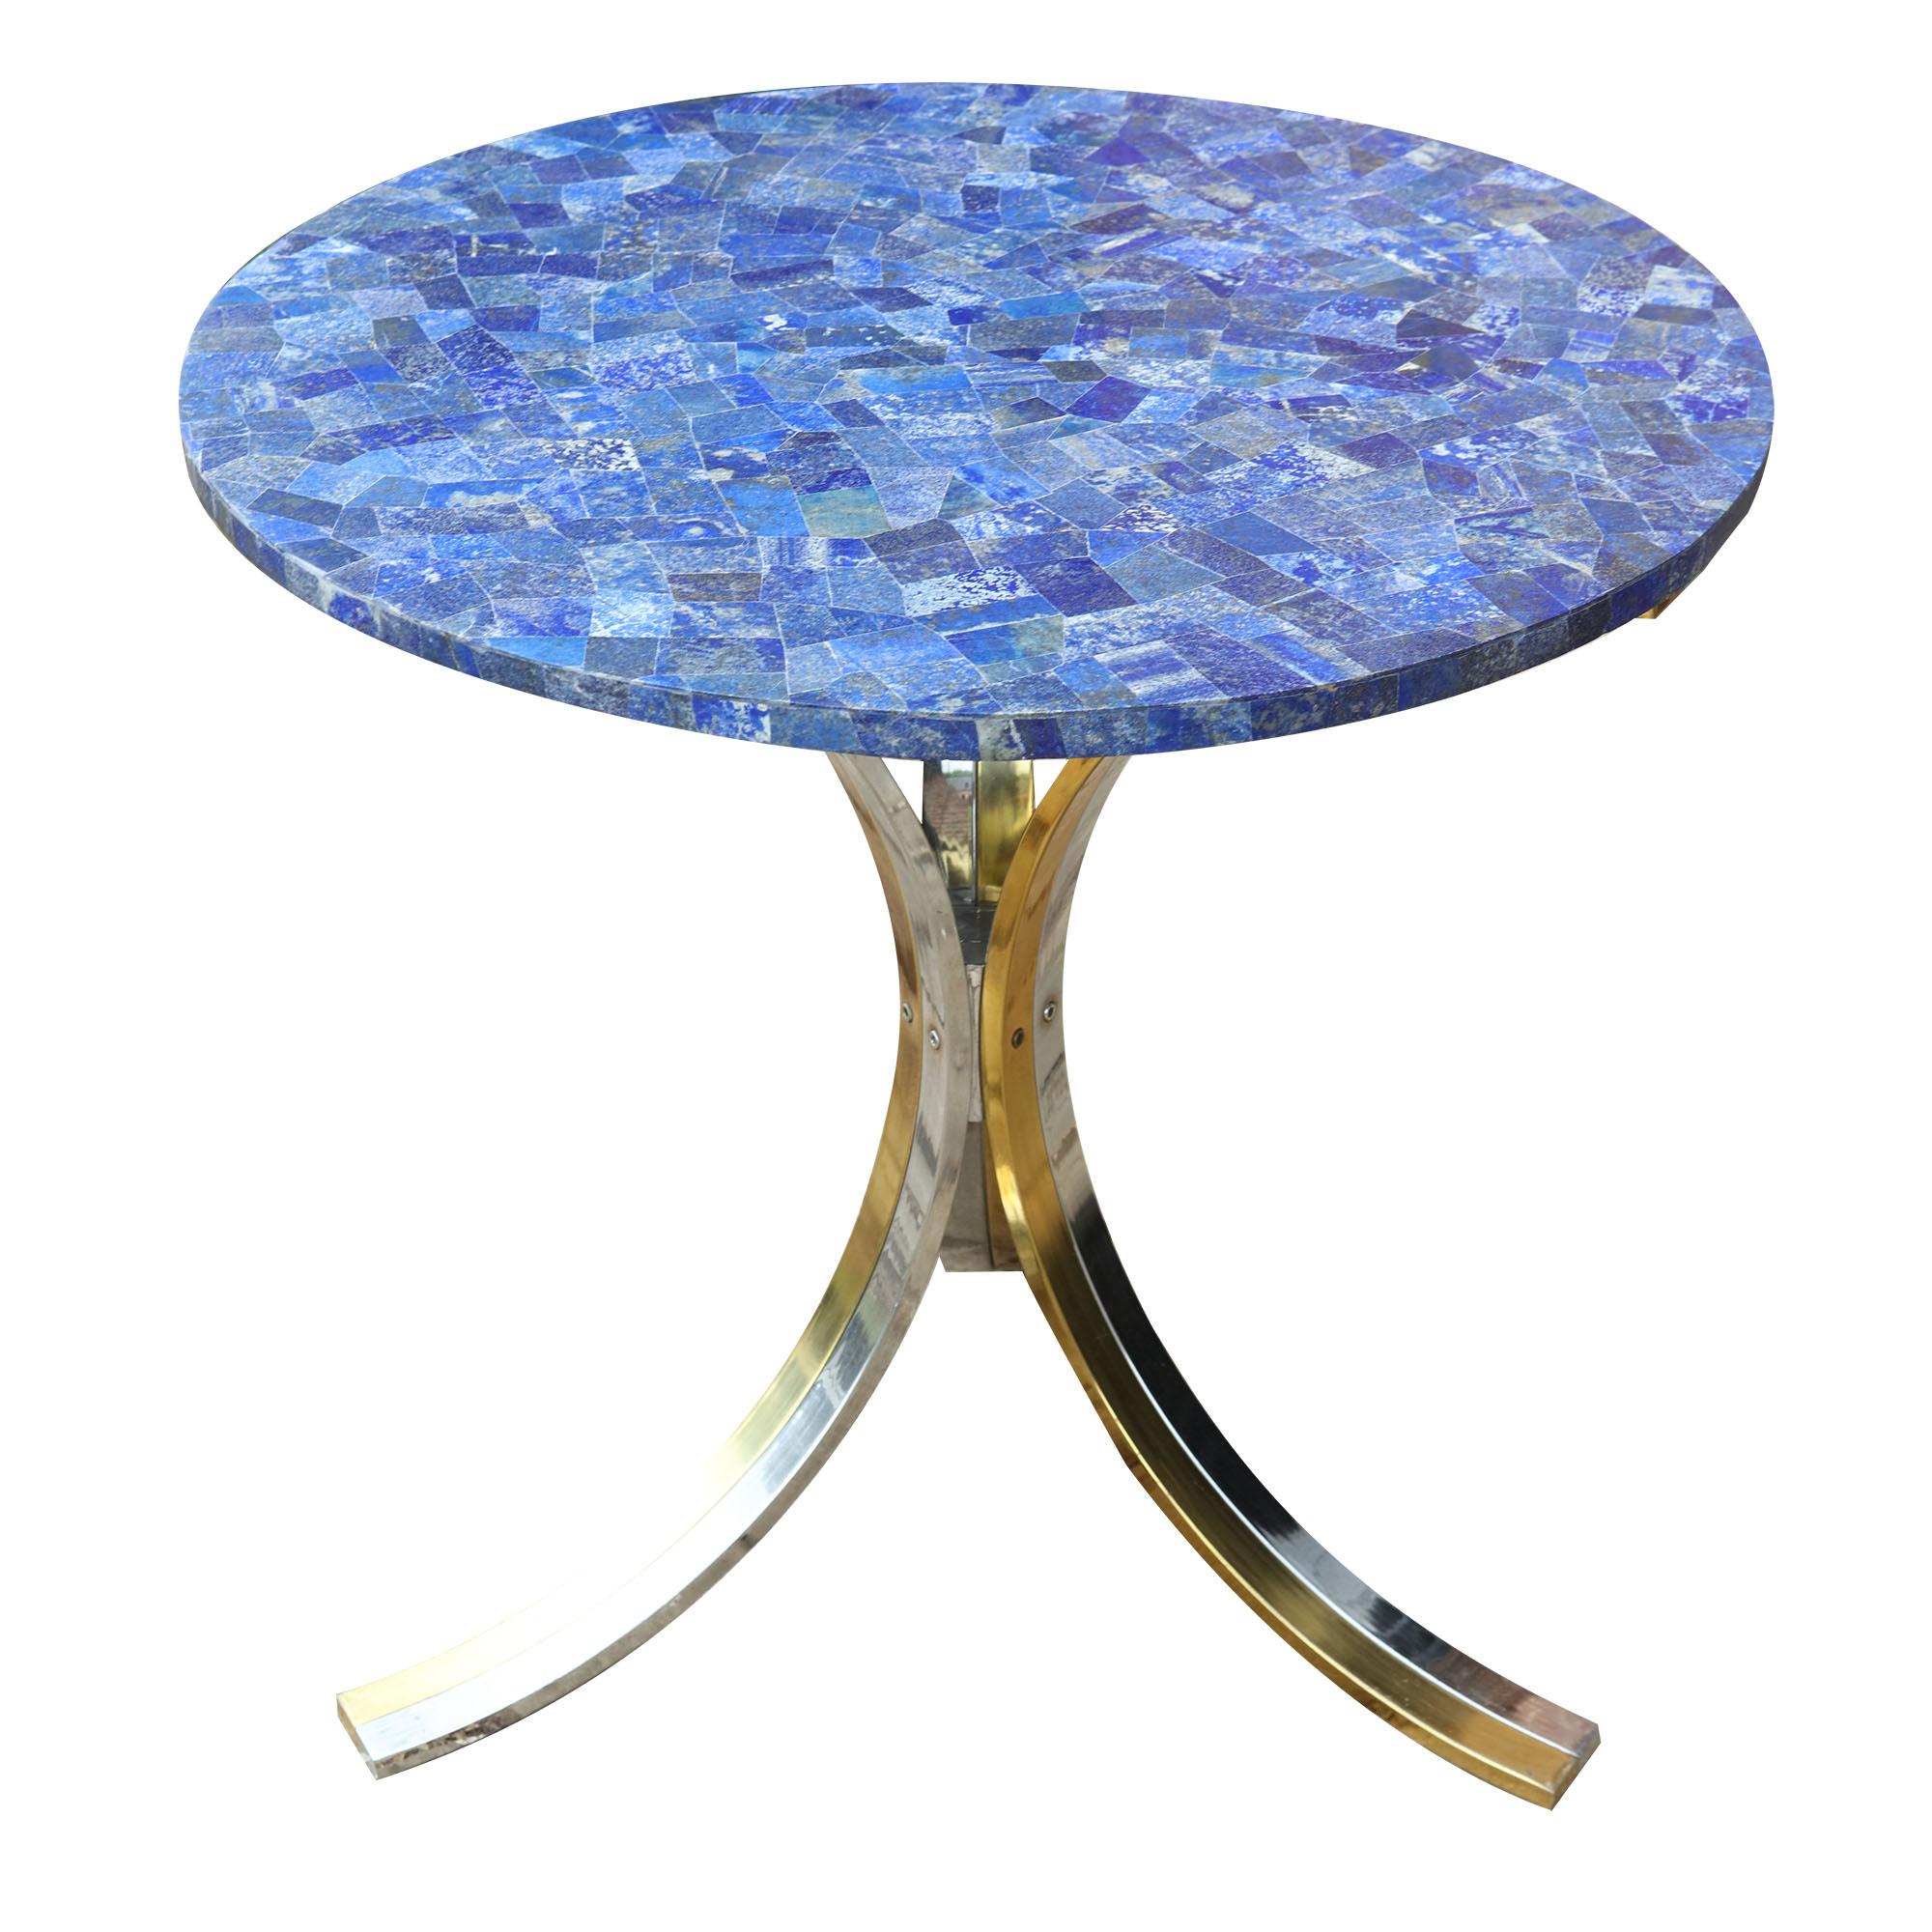 Glamorous pair of midcentury polished chrome and brass end tables attributed to Willy Rizzo, with associated lapis lazuli veneered circular tops.

France or Italy midcentury

Measures: Height 73cm
Diameter 76cm.